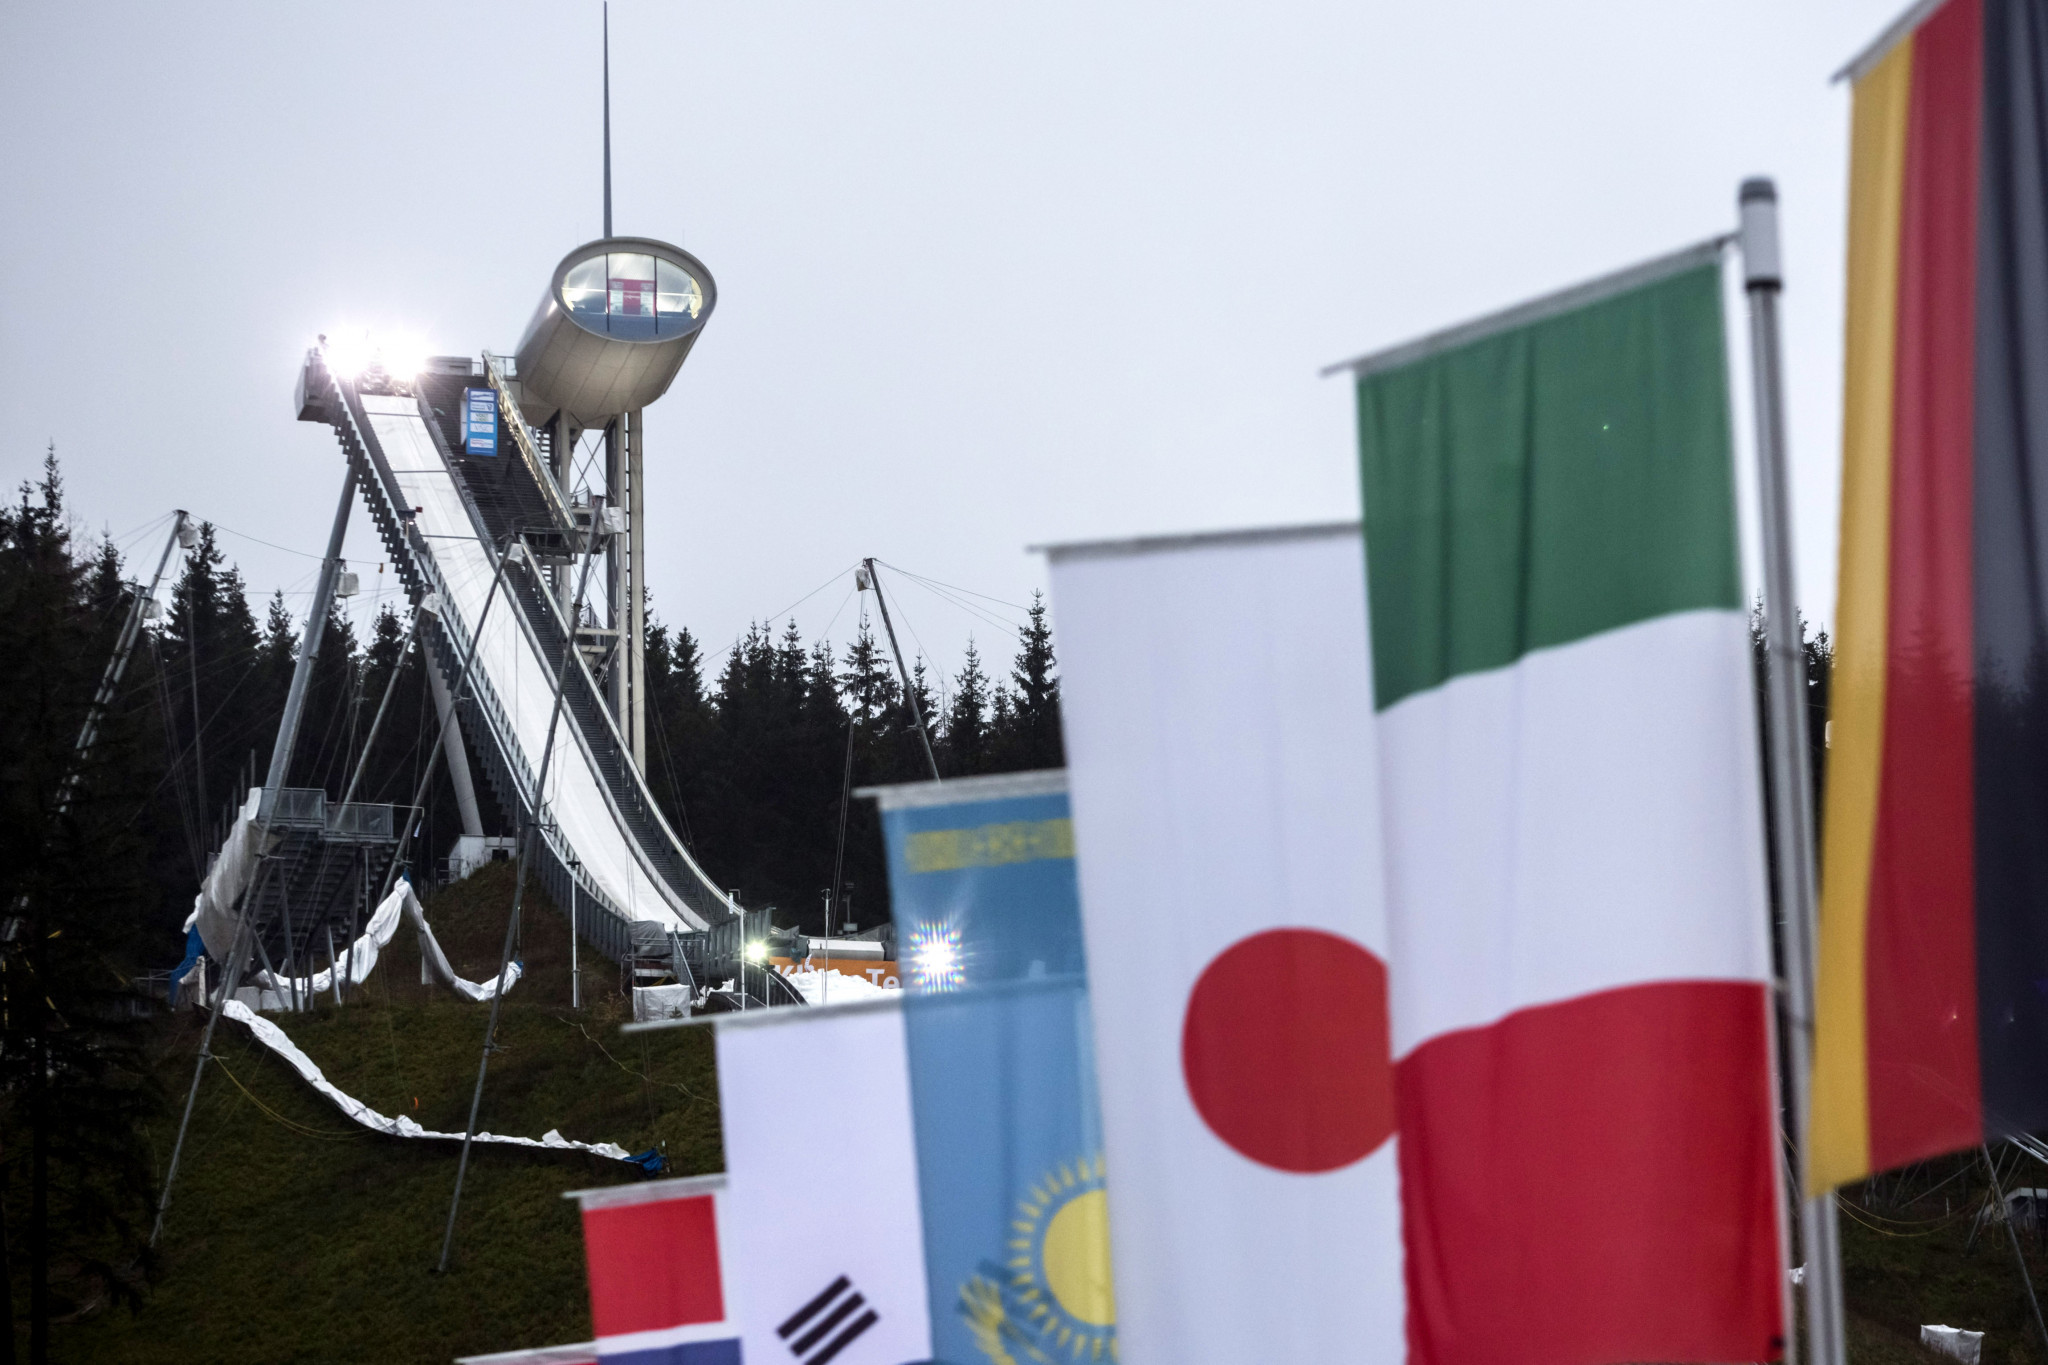 The Vogtland Arena is the host of numerous ski jumping and Nordic combined competitions ©Getty Images